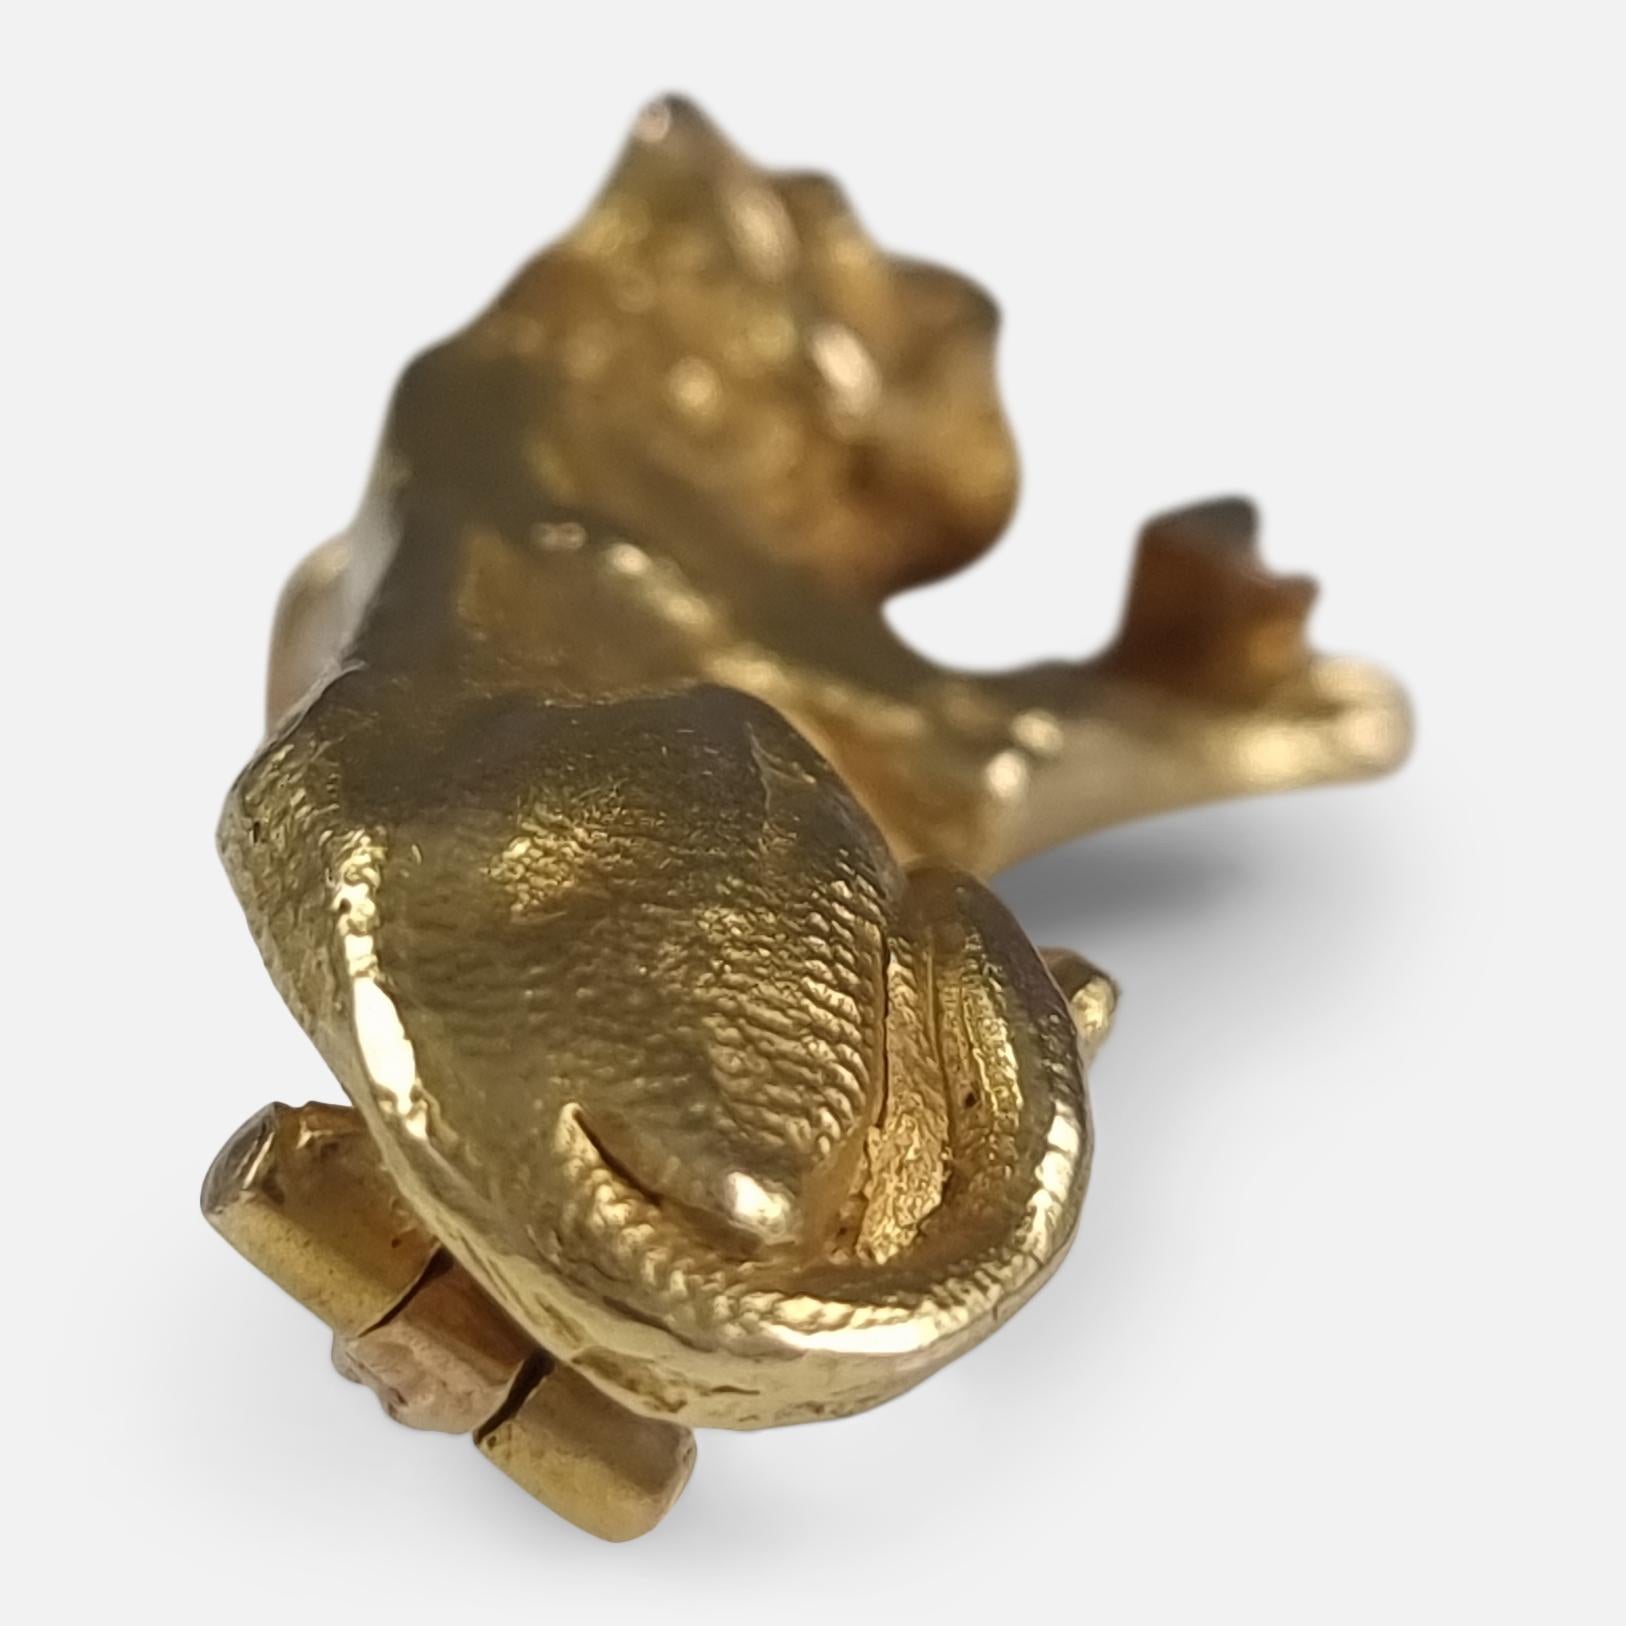 A late Victorian 18ct gold and 0.08 ct diamond lioness brooch. The brooch is crafted in the form of a lioness with an old cut diamond clasped between her paws.

As was common for the period, the brooch is unhallmarked and has been tested and